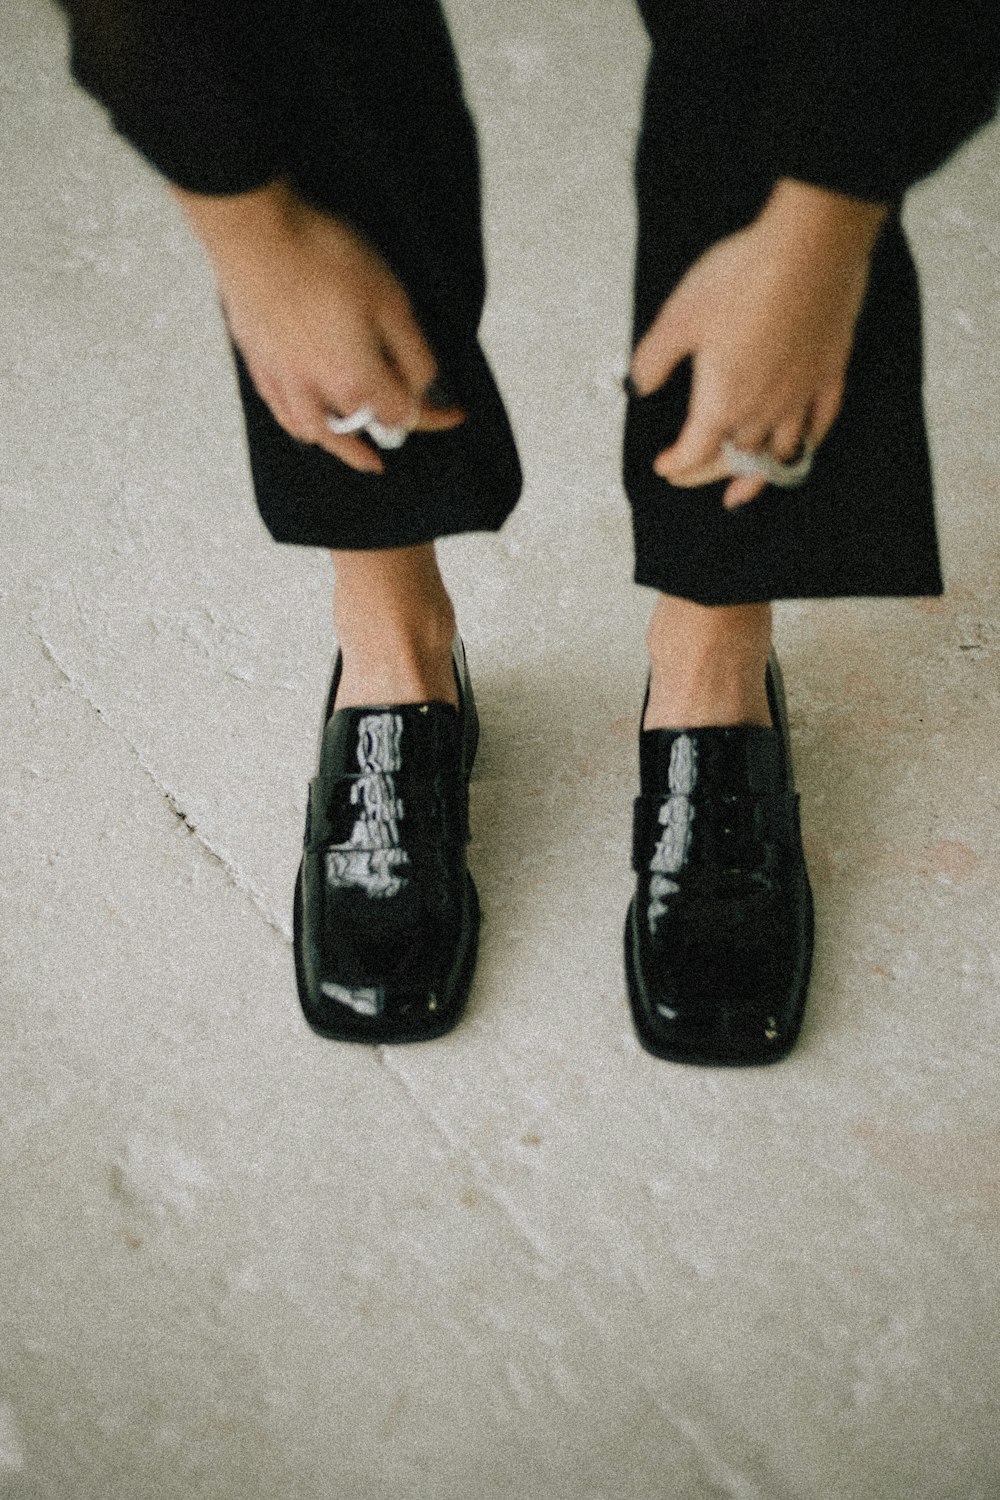 a close up of a person wearing black shoes